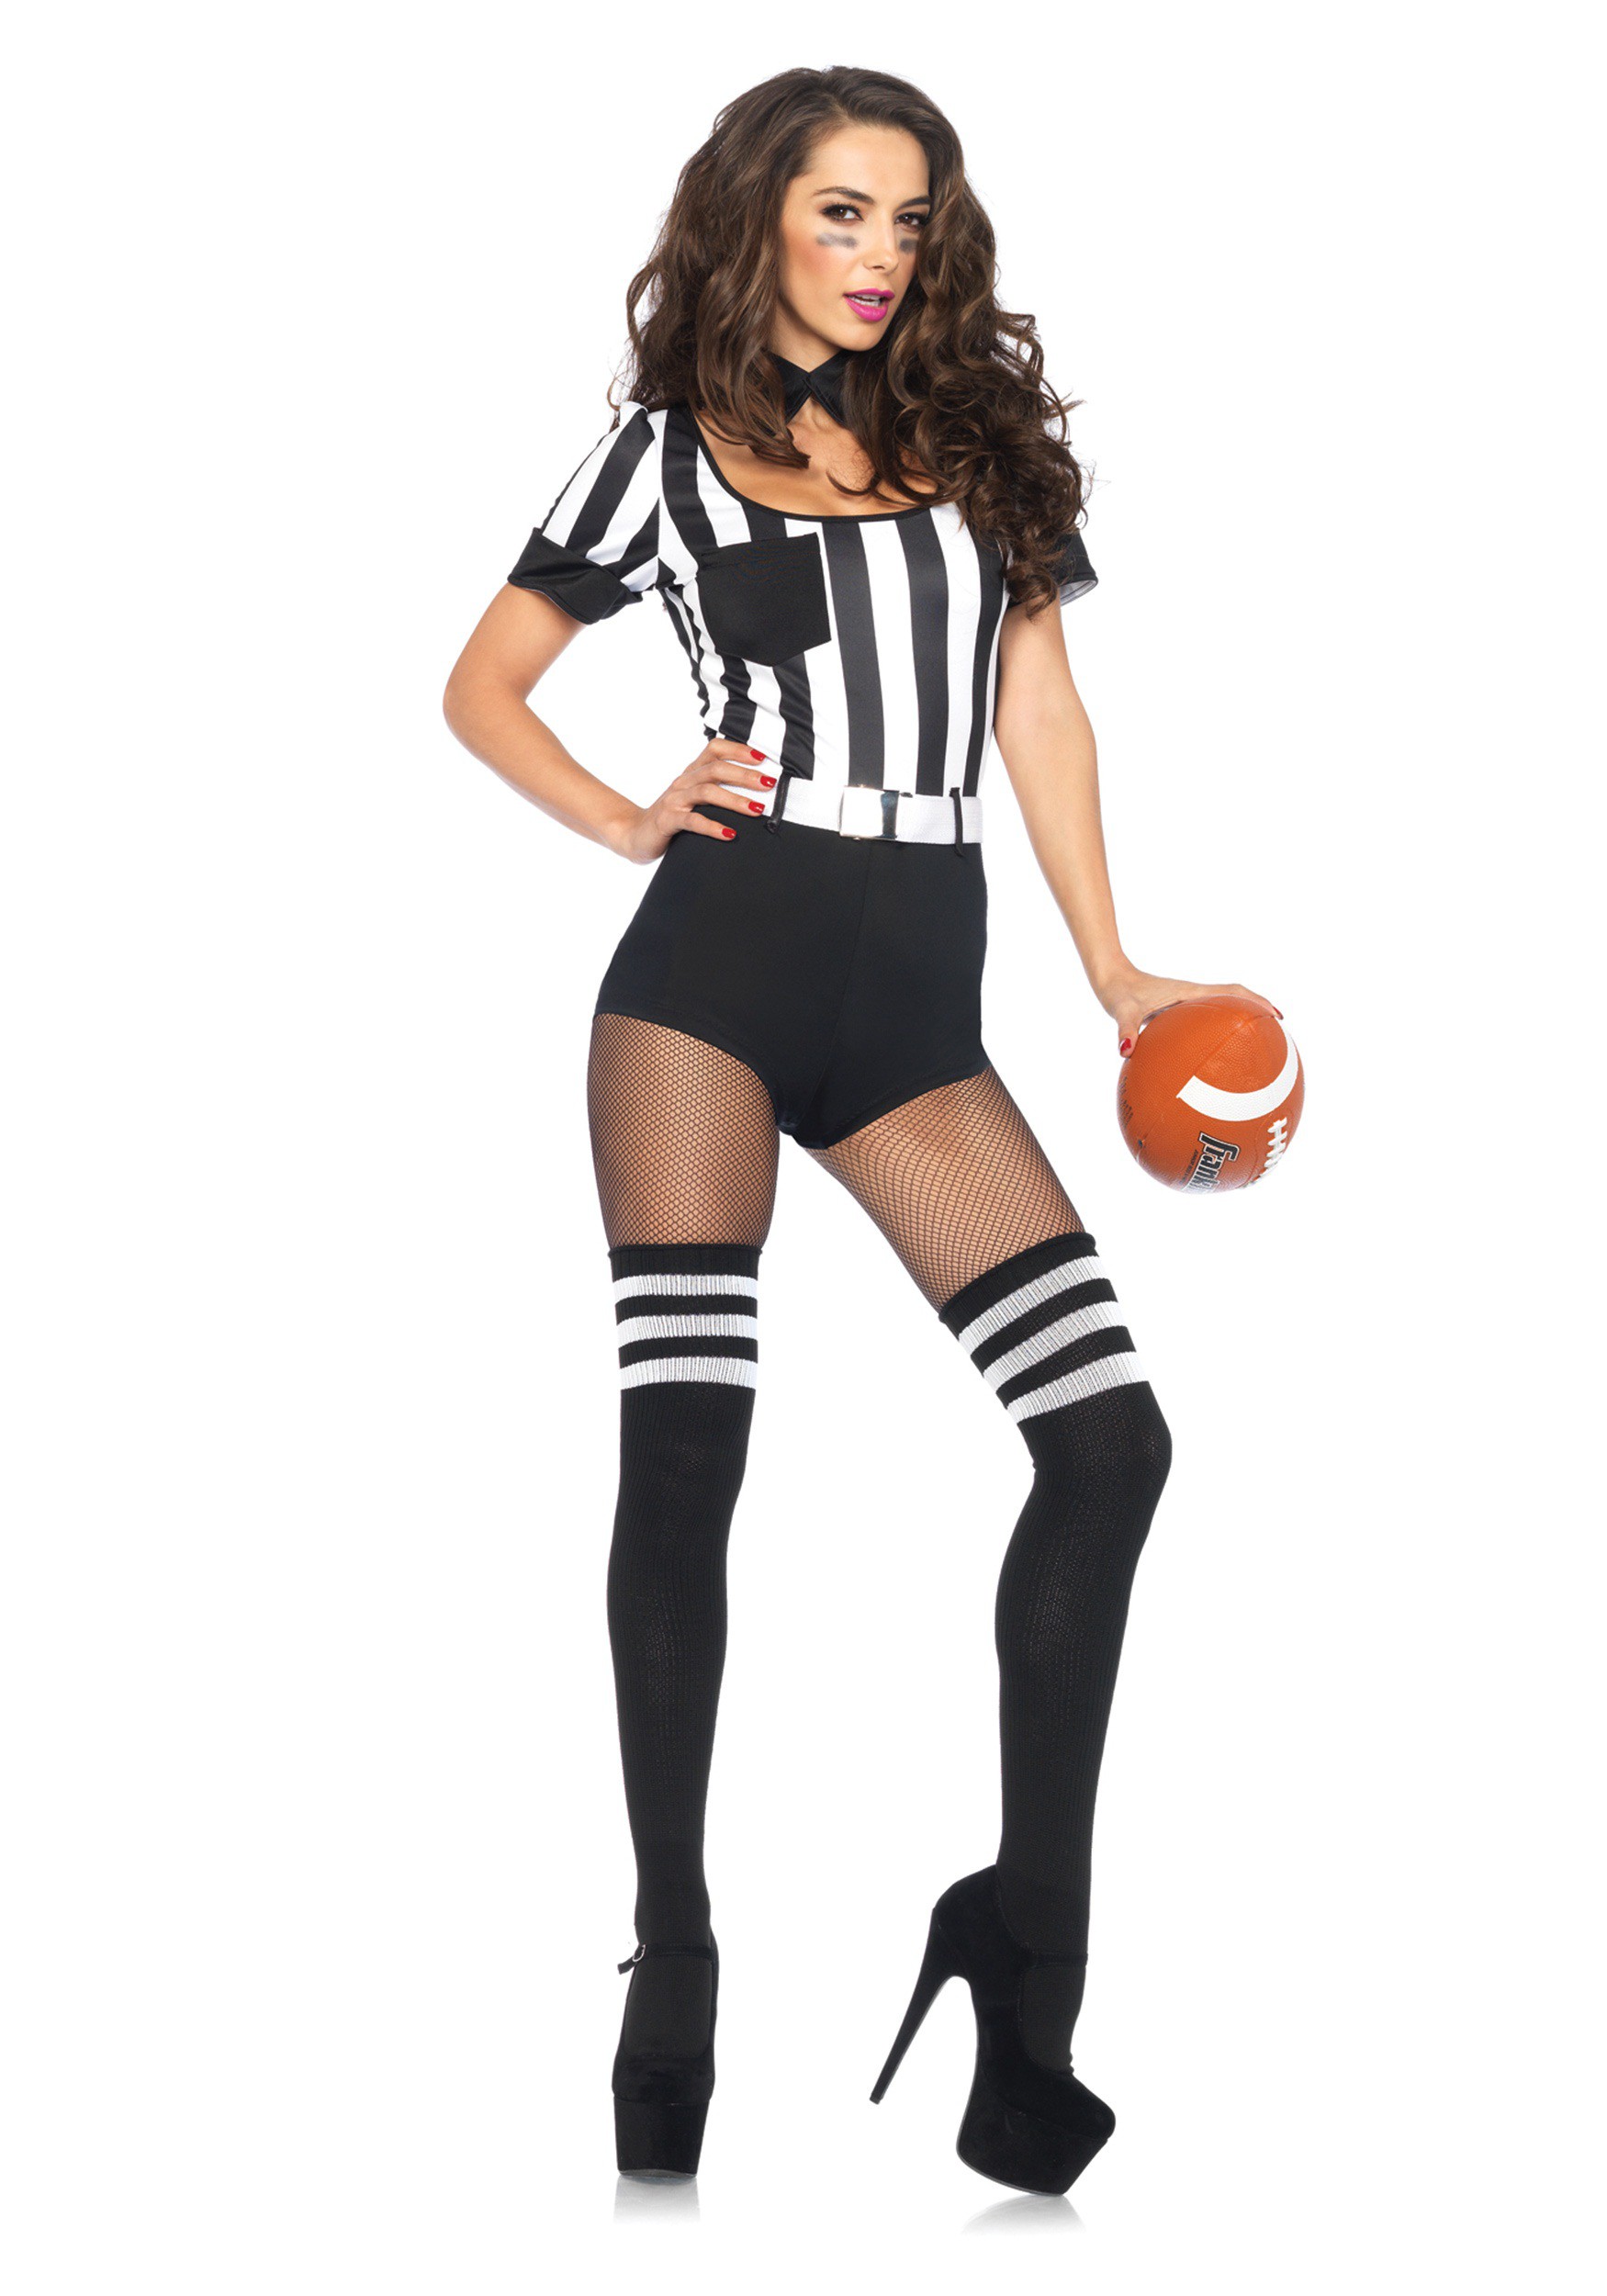 No Rules Womens Referee Costume